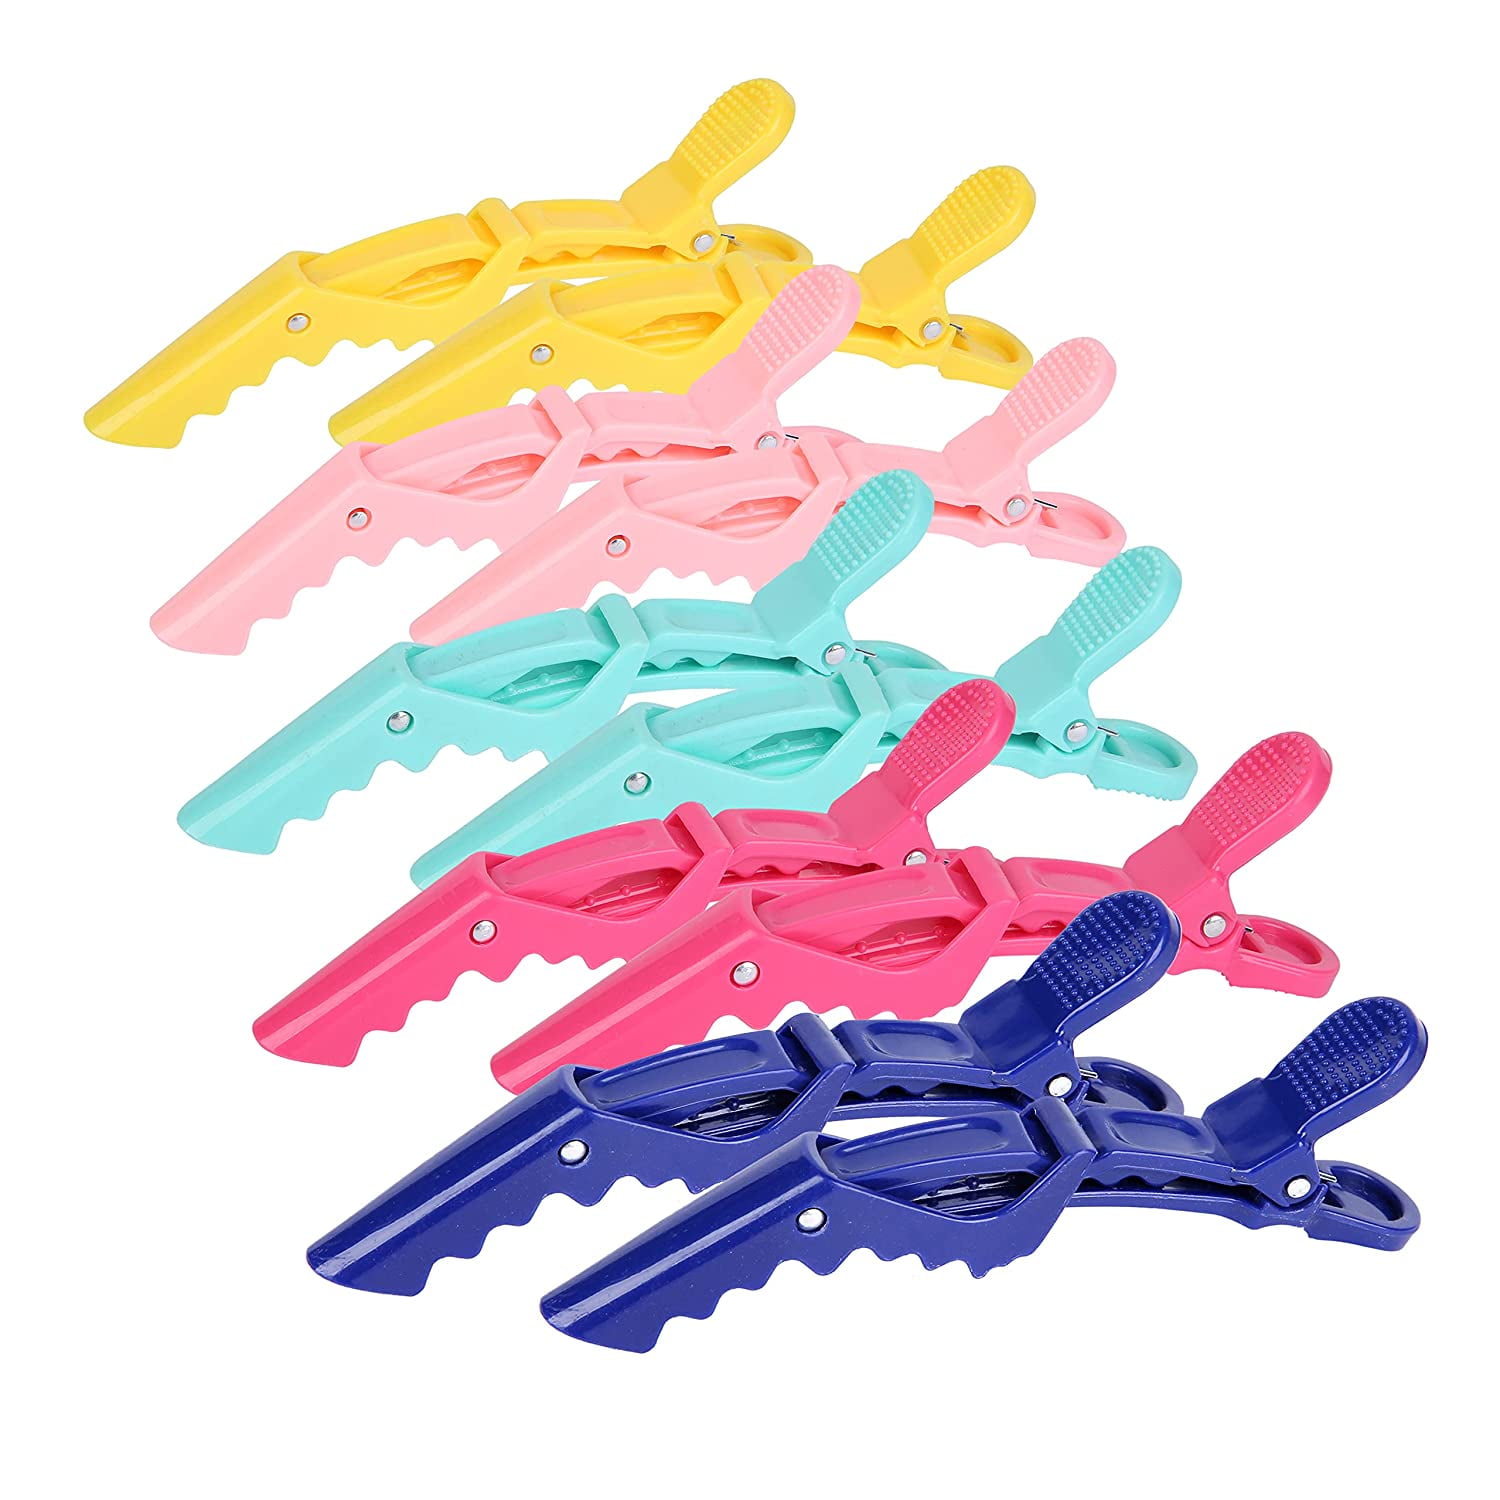 Hair Clips for Women by \u2013 Wide Teeth & Double-Hinged Design \u2013  Alligator Styling Sectioning Clips of Professional Hair Salon Quality -  10Pack